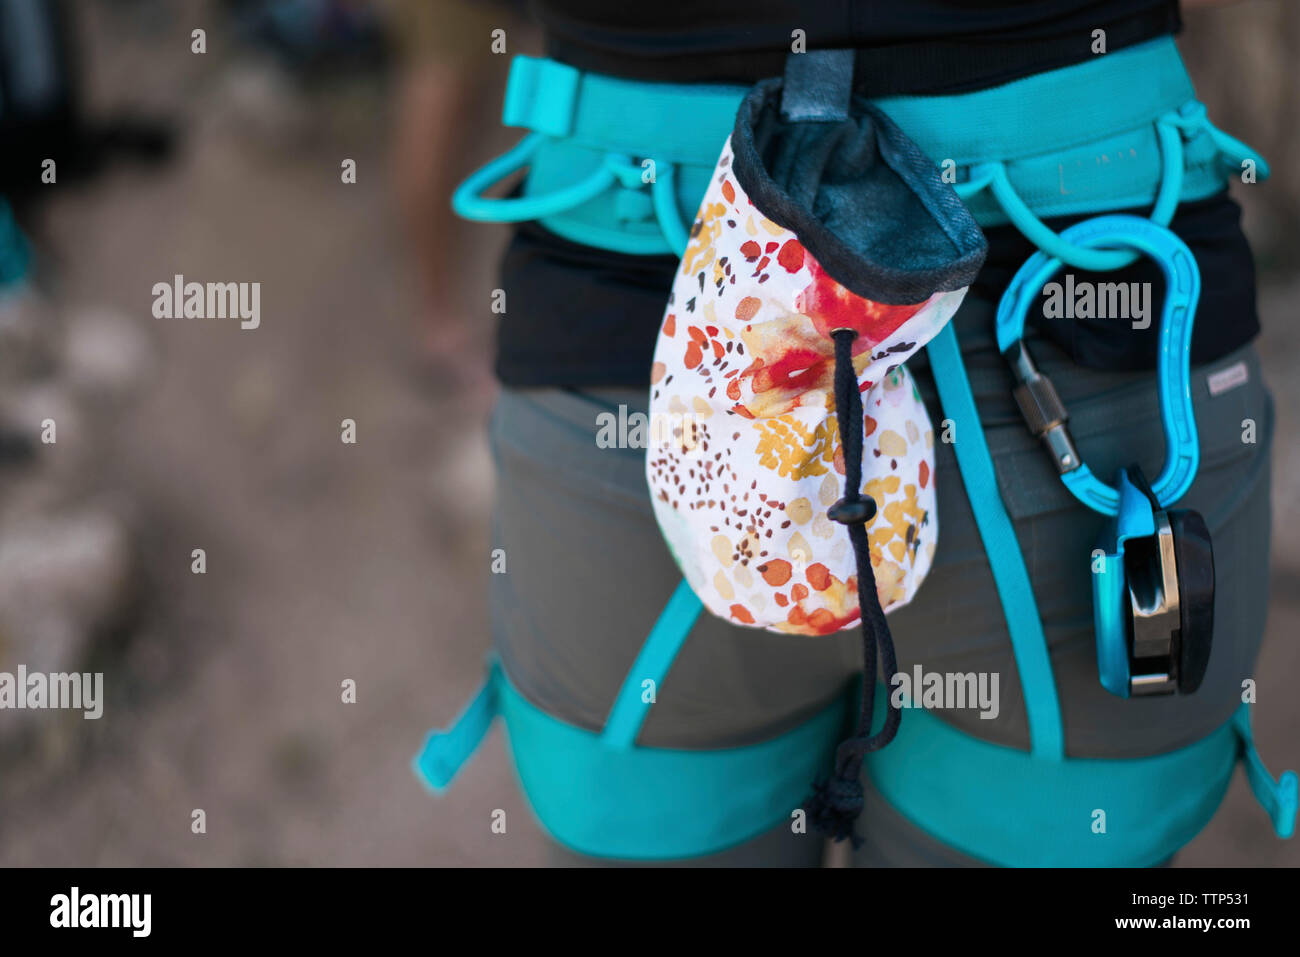 Midsection of woman wearing safety harness while standing outdoors Stock Photo